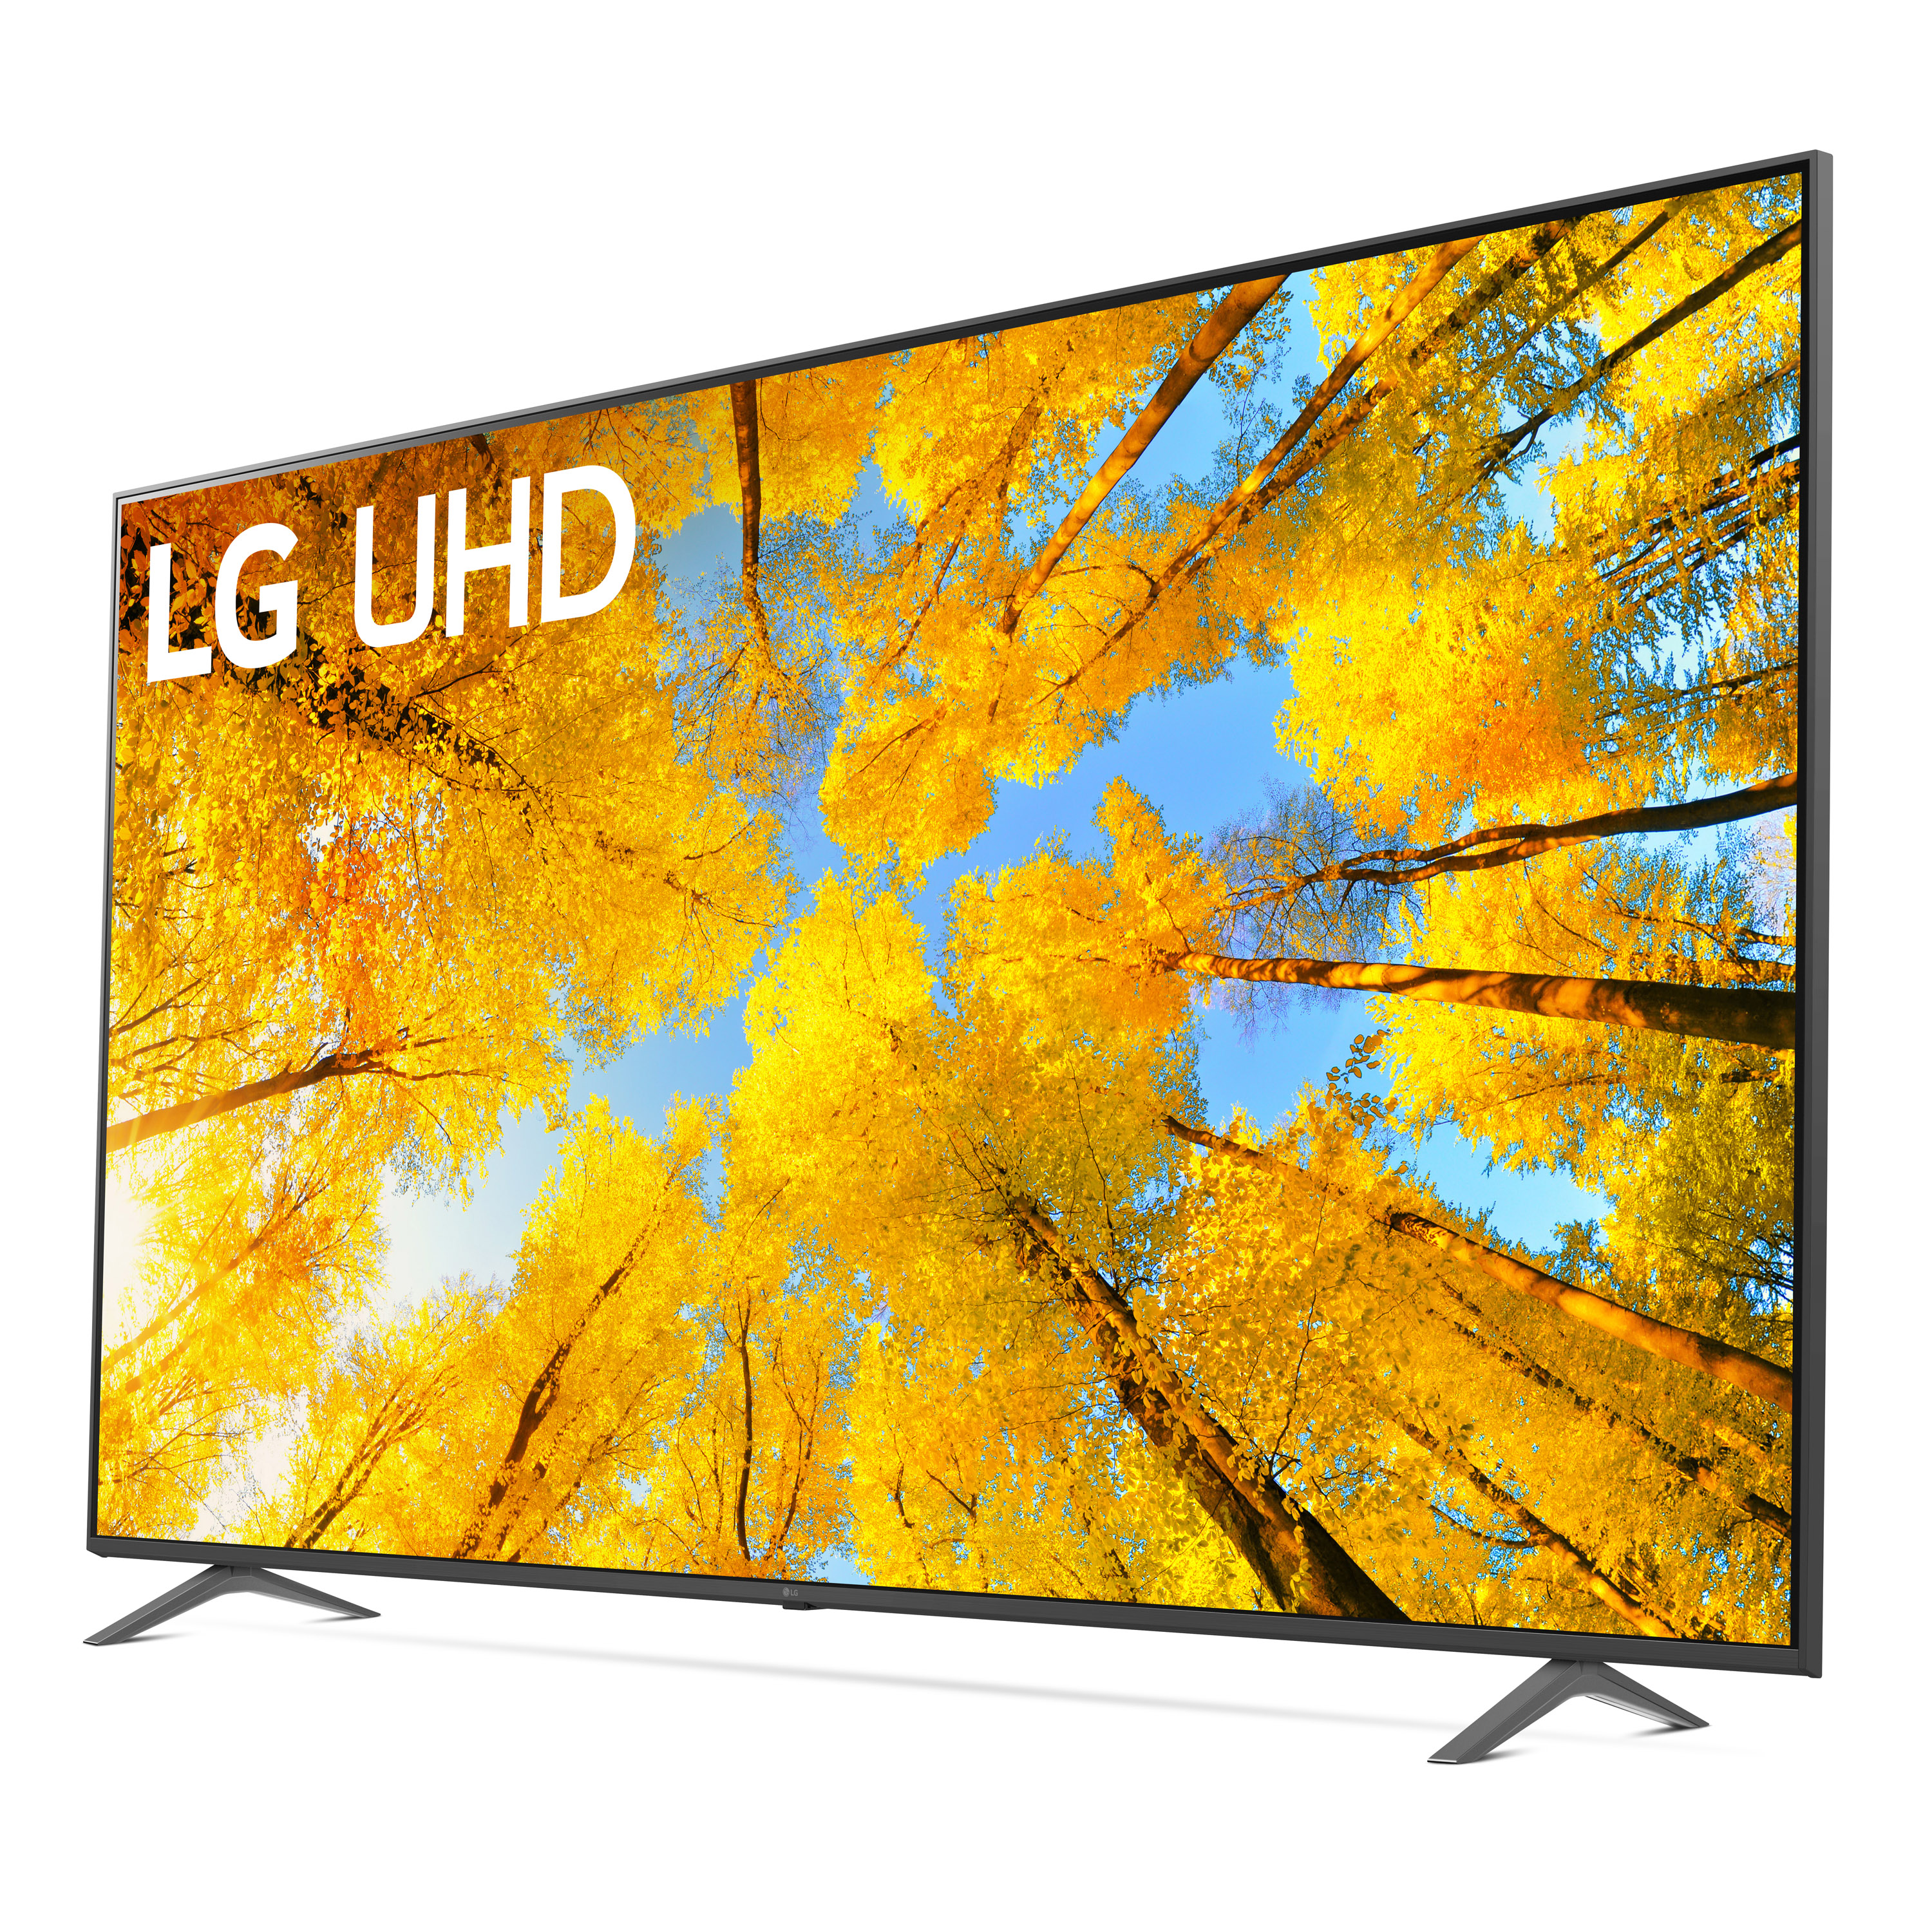 LG 86 inches Class 4K UHD 2160P WebOS22 Smart TV with Active HDR UQ7590 Series 86UQ7590PUD - image 3 of 14